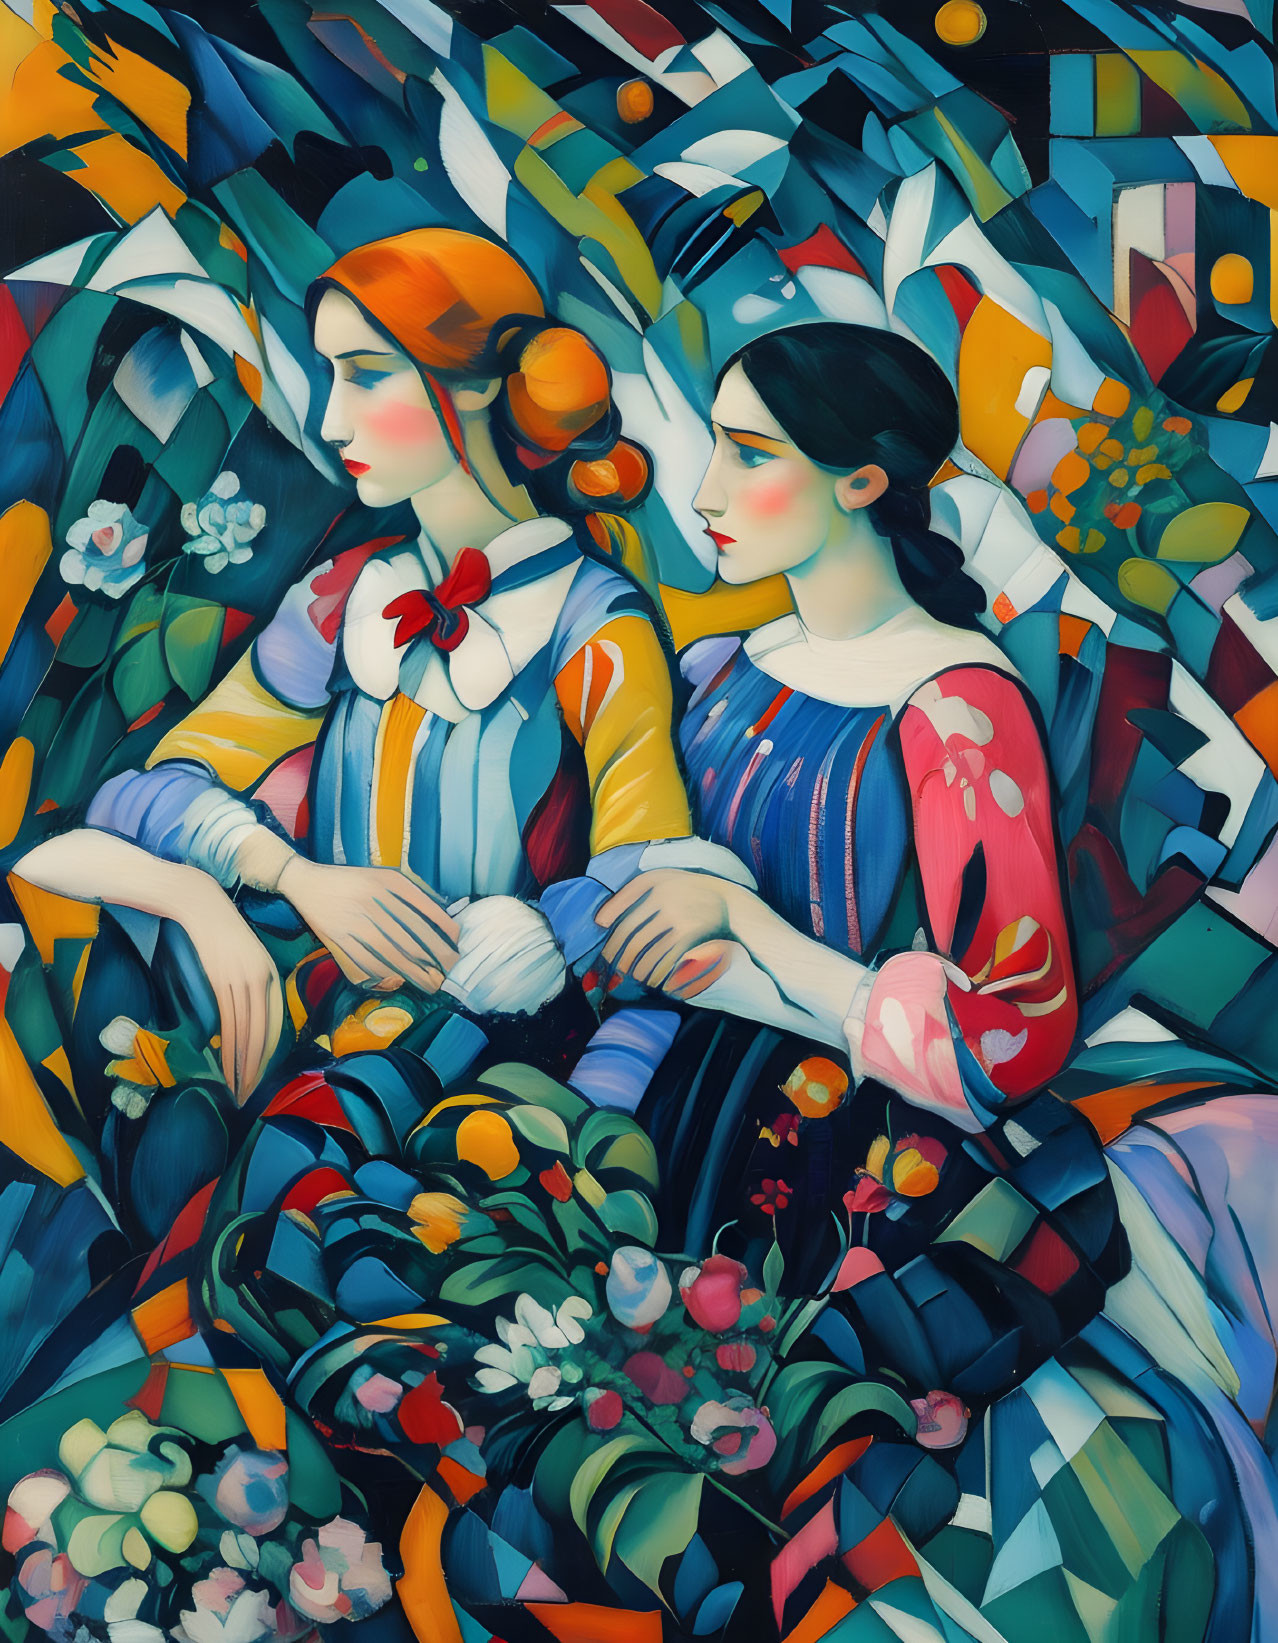 Colorful Cubist-Style Painting of Two Women Amid Floral Patterns